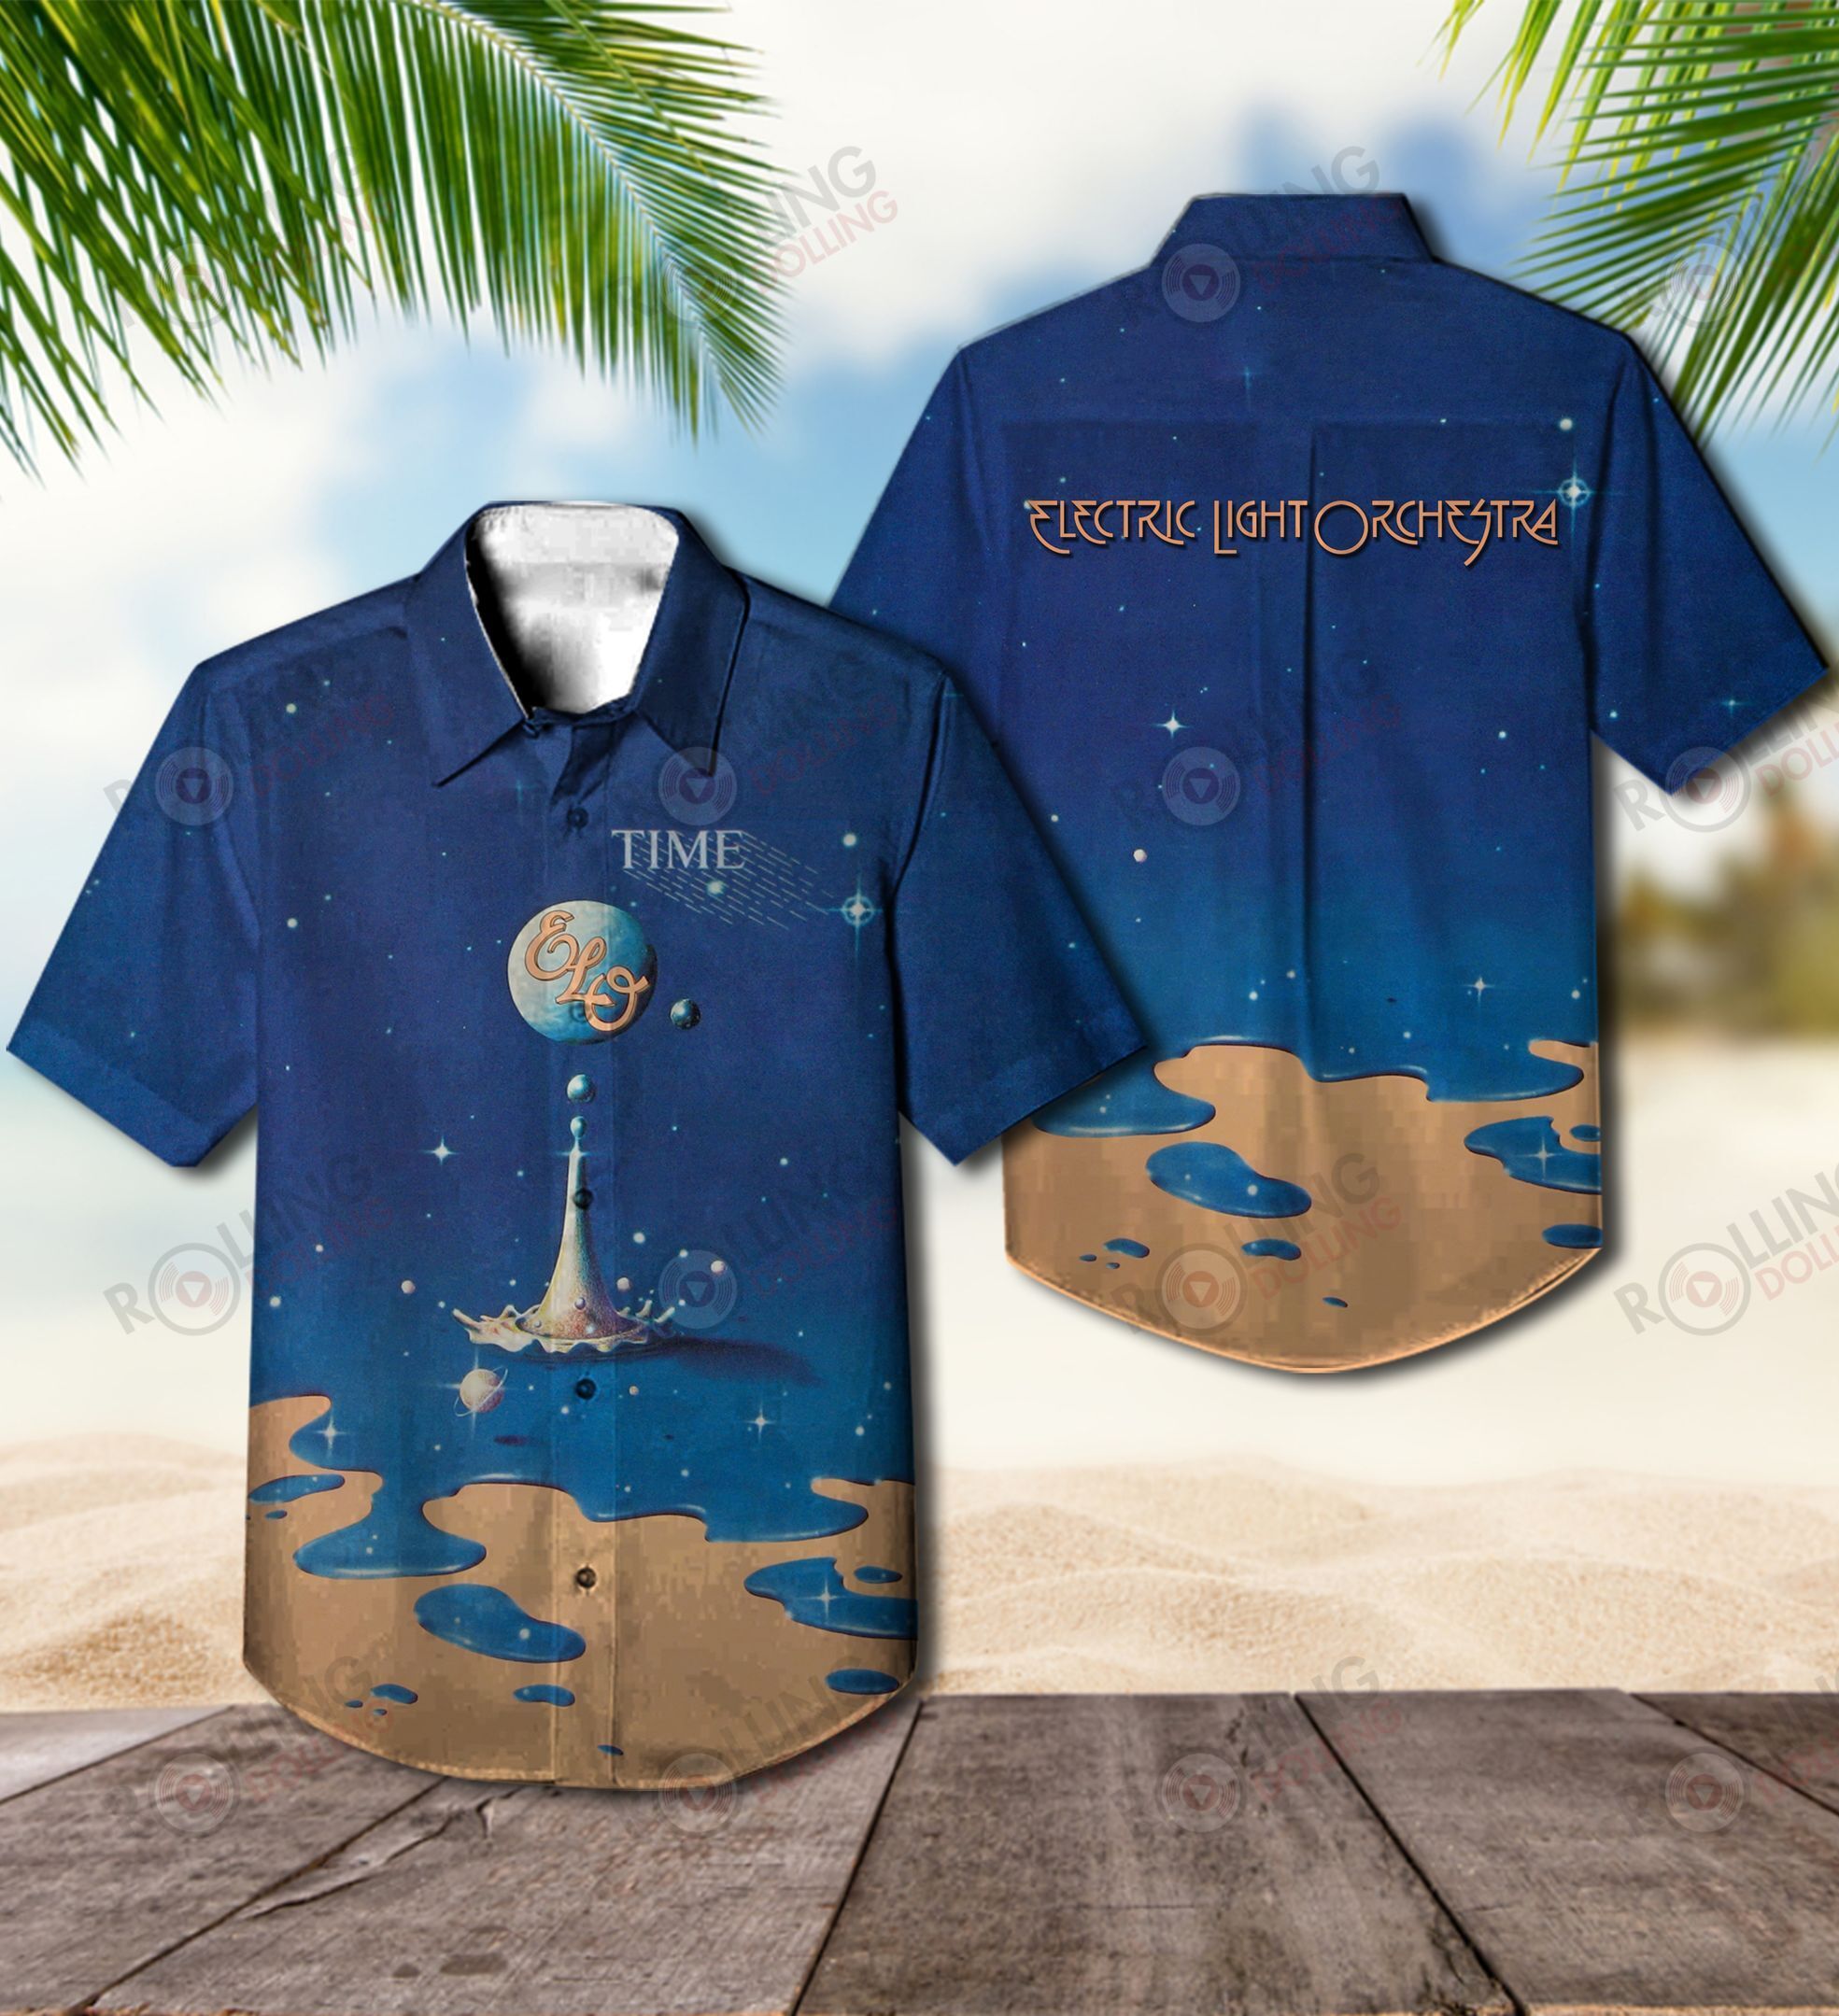 This would make a great gift for any fan who loves Hawaiian Shirt as well as Rock band 136